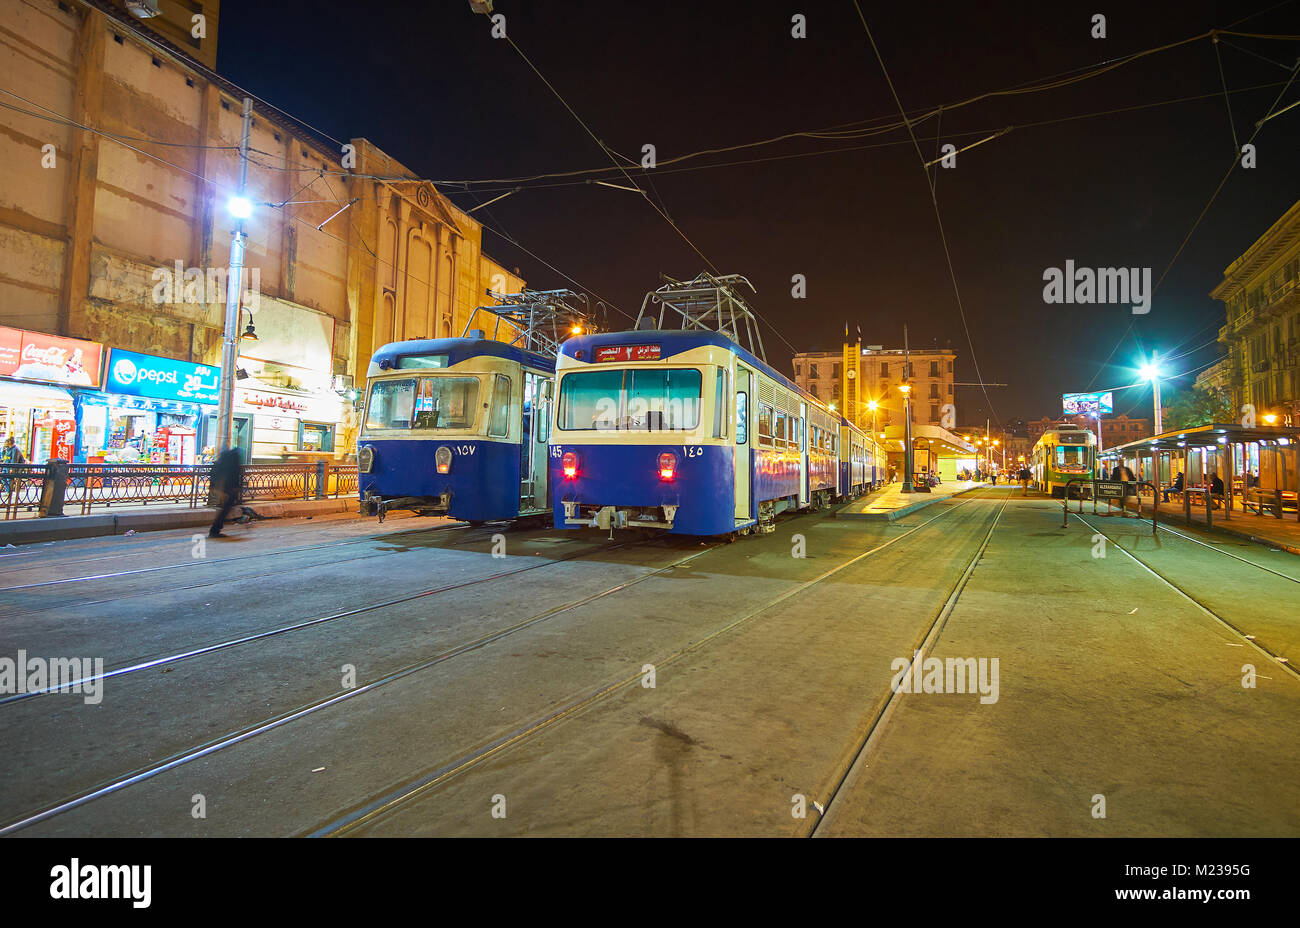 ALEXANDRIA, EGYPT - DECEMBER 17, 2017: Two blue trams stay on the terminus station in Mahta Al Raml square, located in old town, on December 17 in Ale Stock Photo